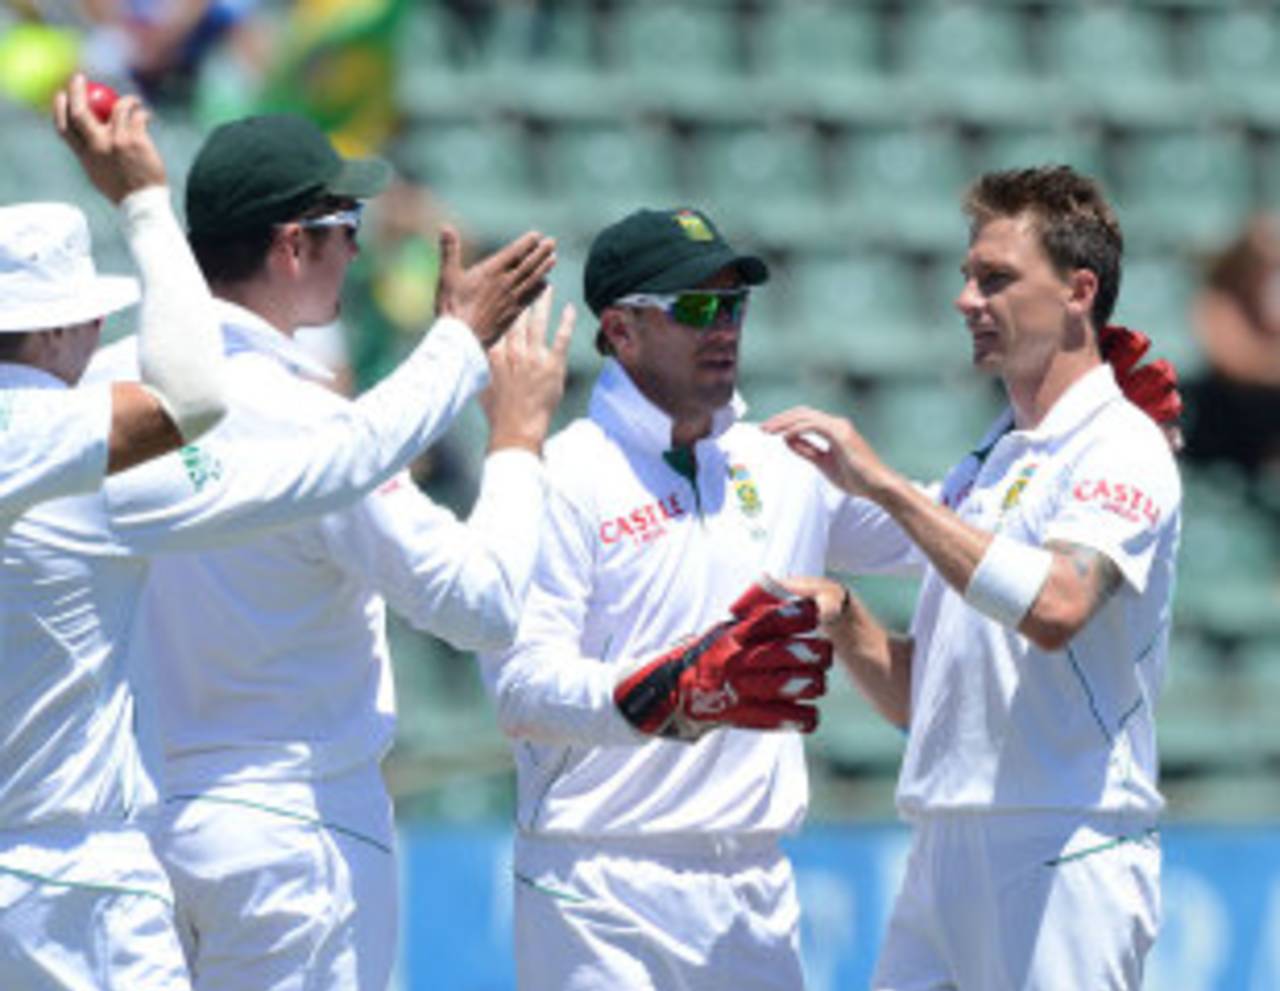 Dale Steyn repaid Neil Wagner's bouncers and then took his wicket&nbsp;&nbsp;&bull;&nbsp;&nbsp;Gallo Images